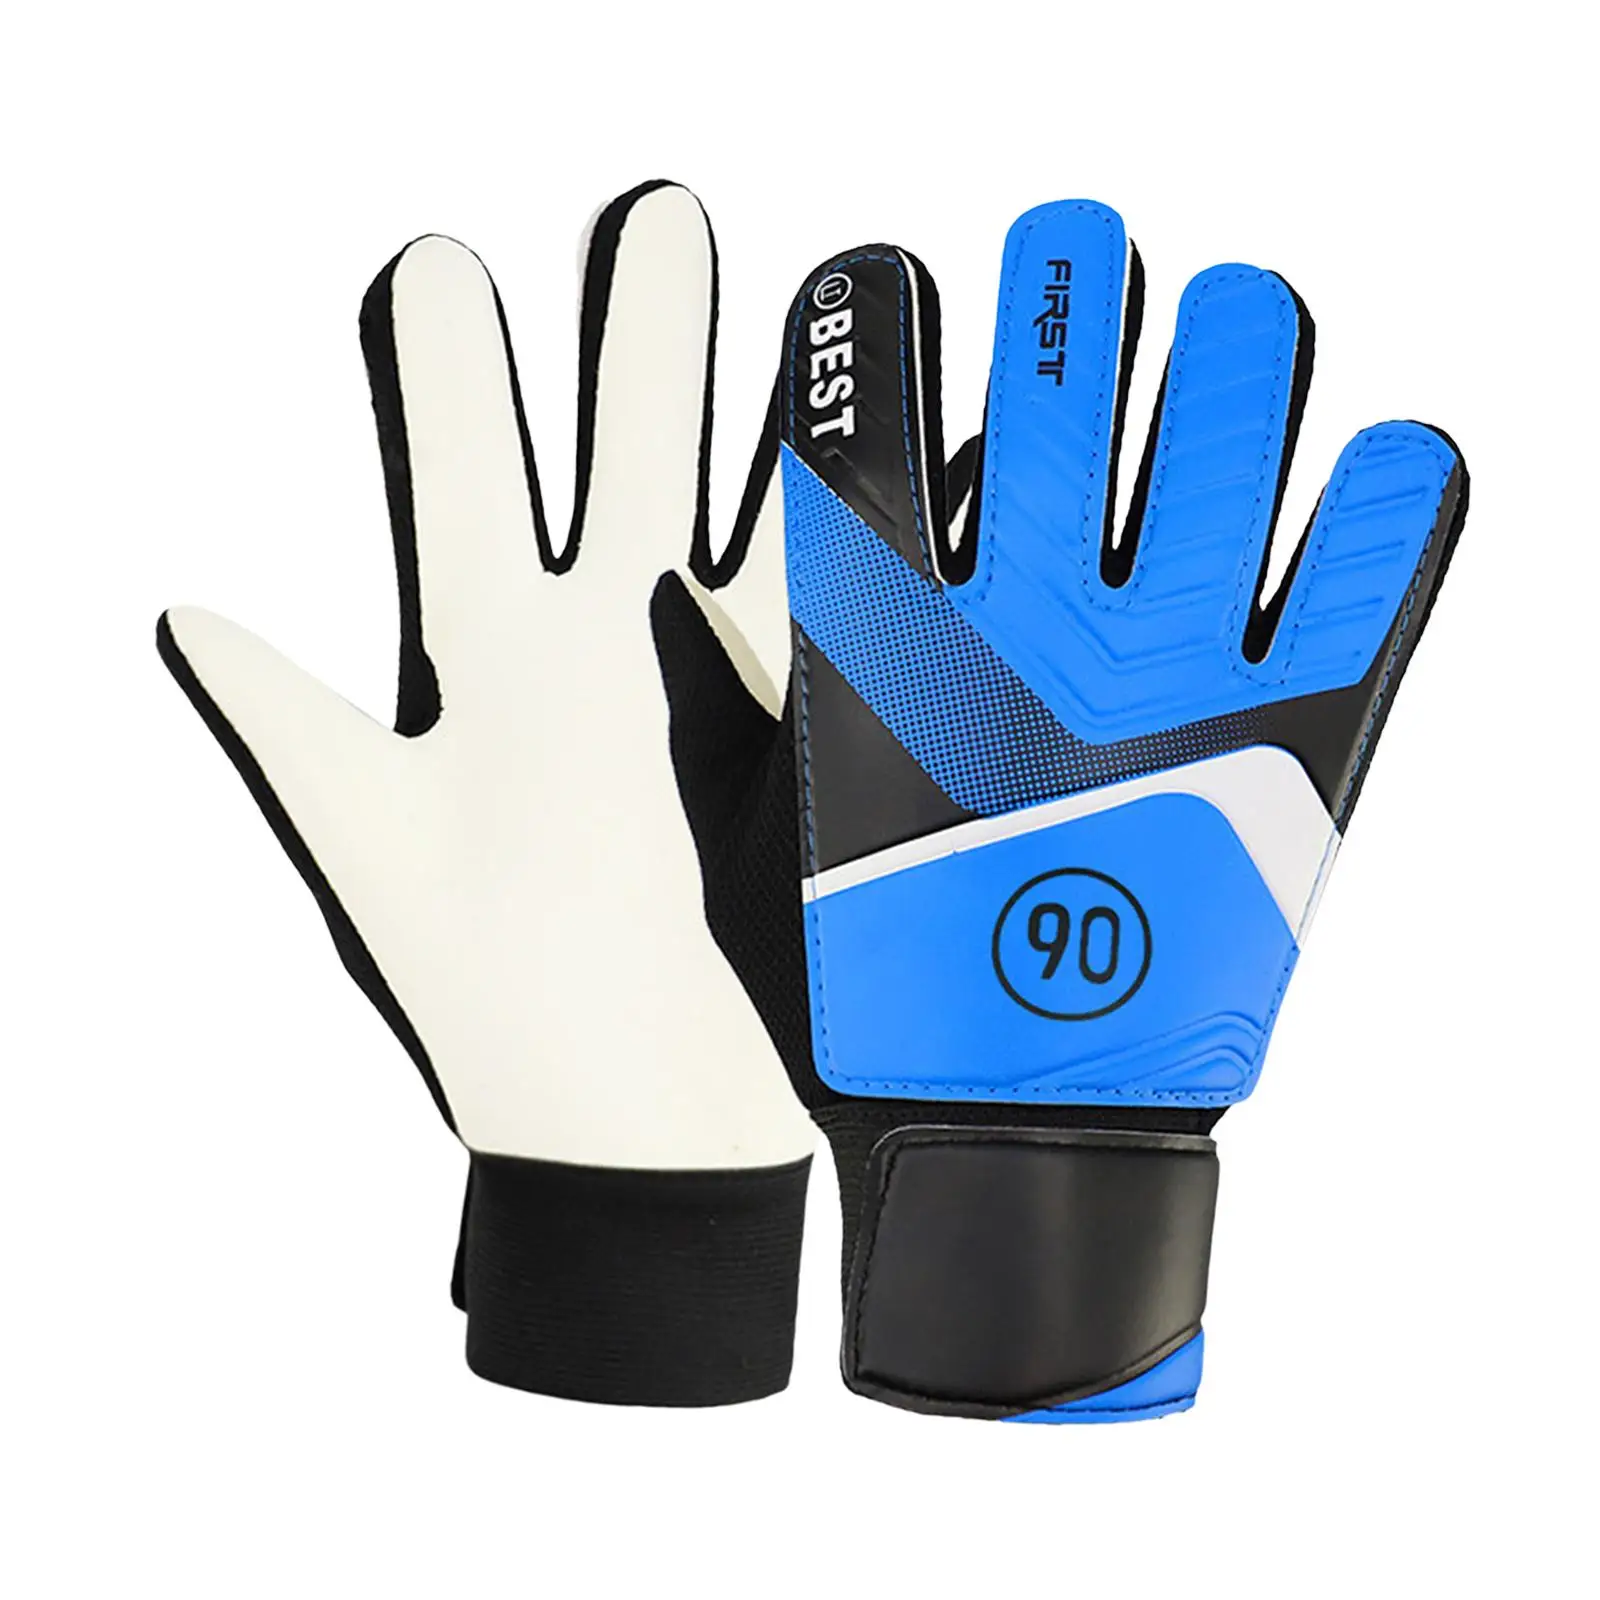 Goalkeeper Gloves Professional Match Nonslip Training Strong Grip Thickened Comfortable Latex Palm for Boys Girls Goalie Gloves